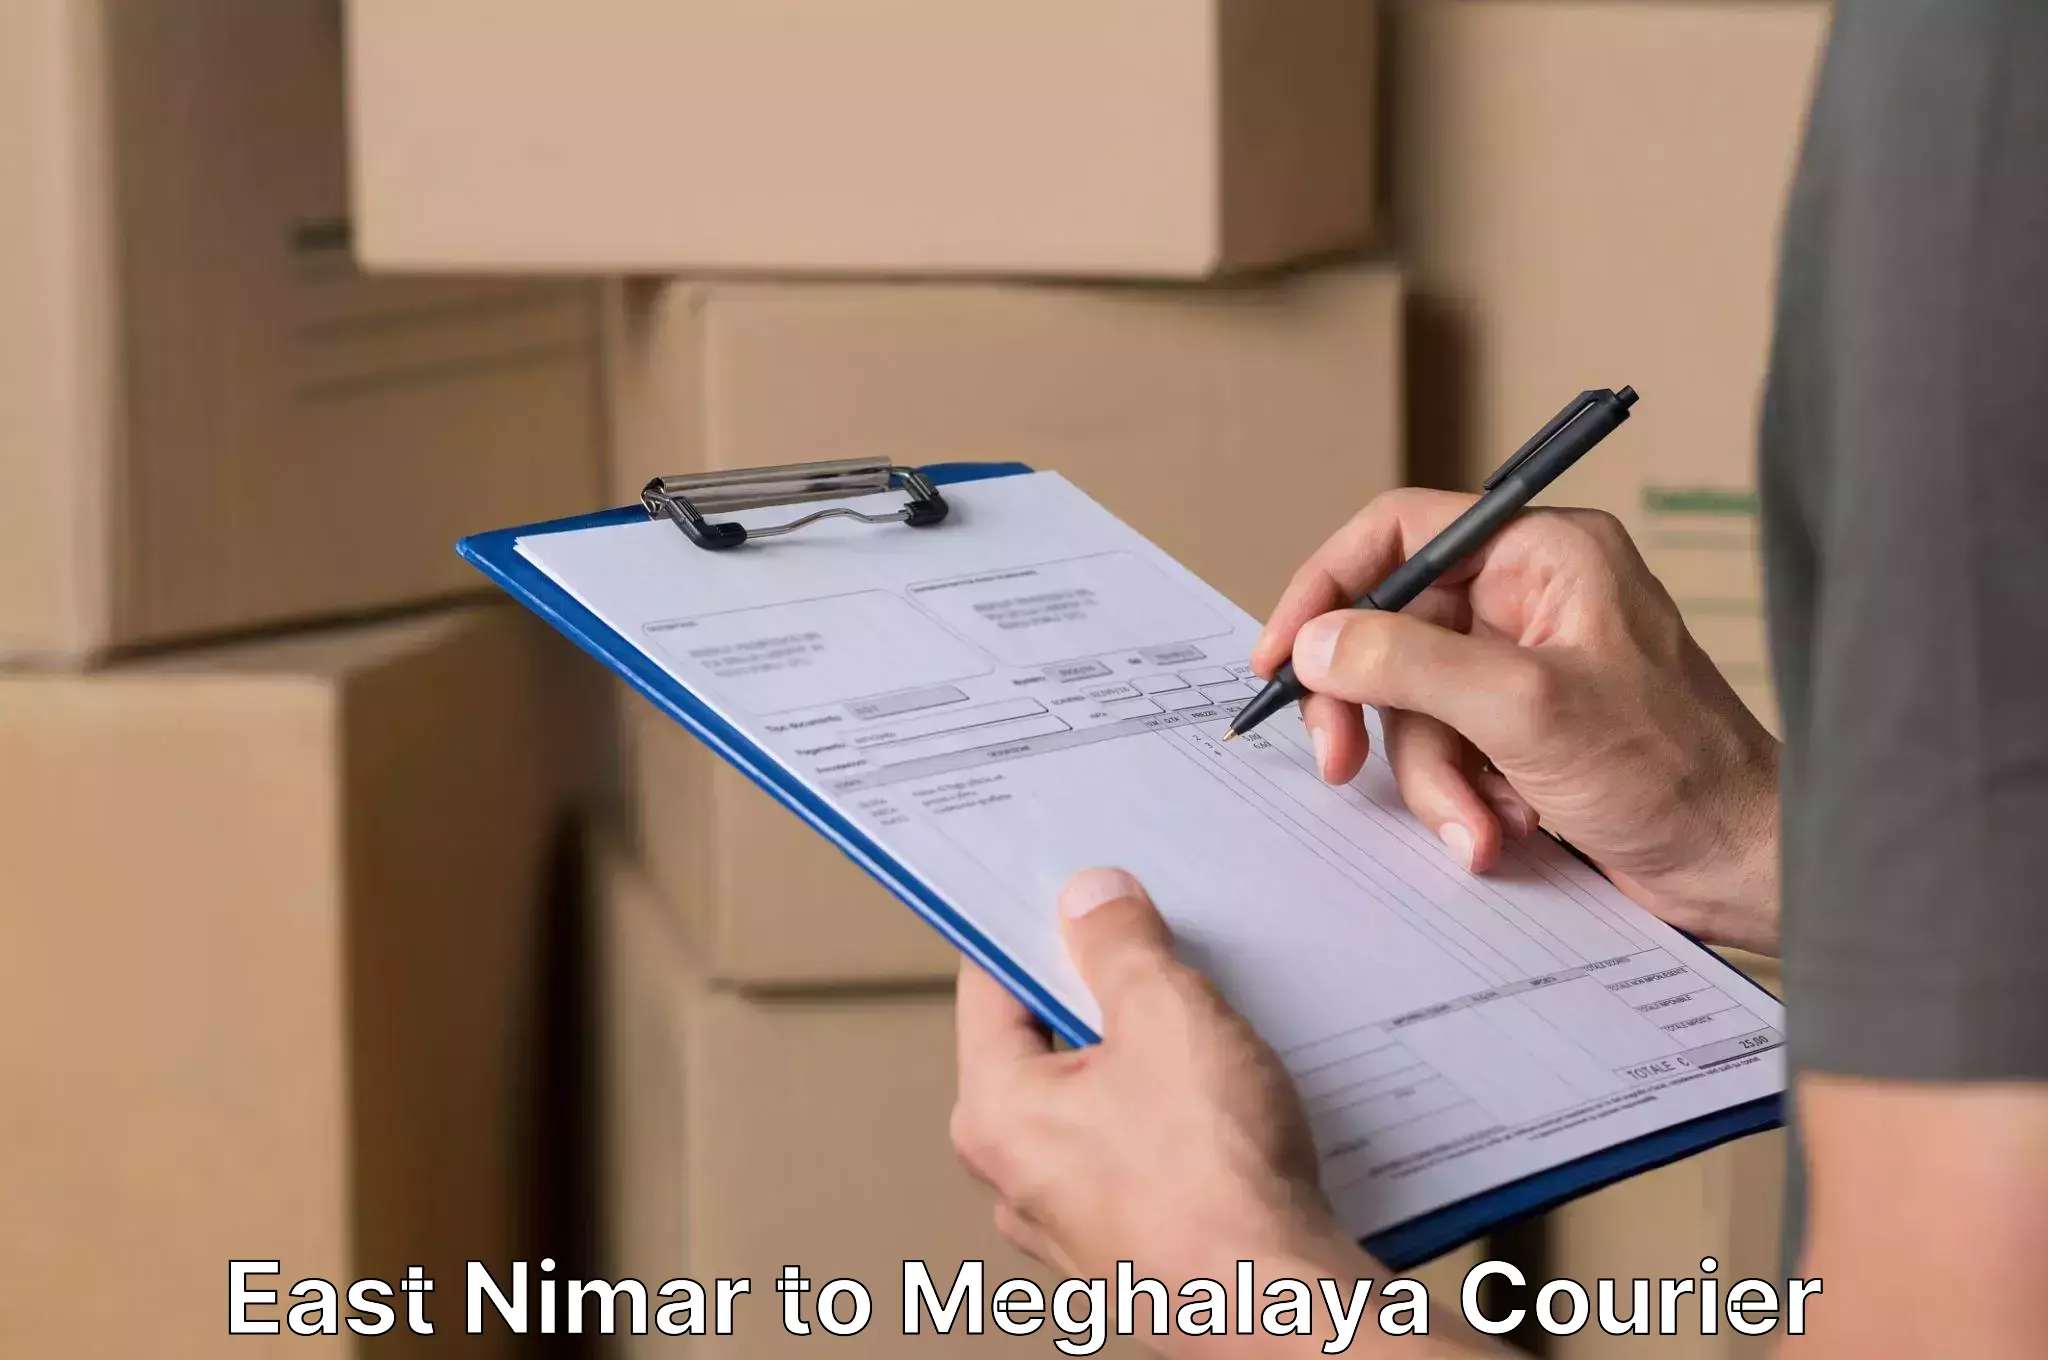 Professional relocation services East Nimar to Shillong